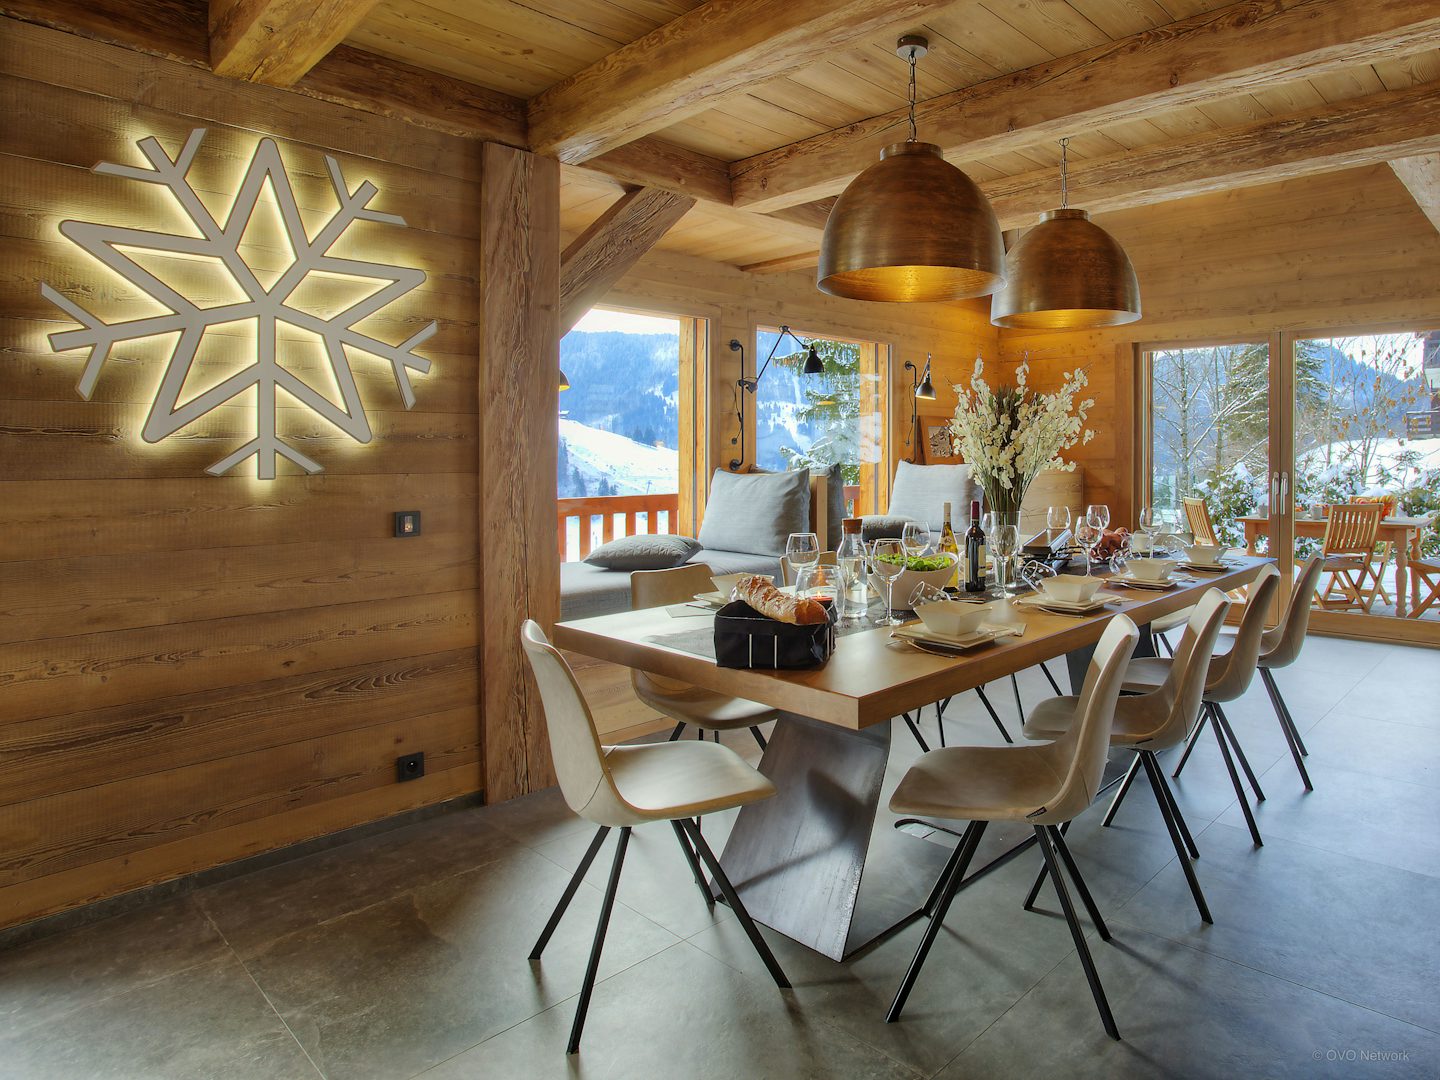 The dining table at Chalet Steallone.
